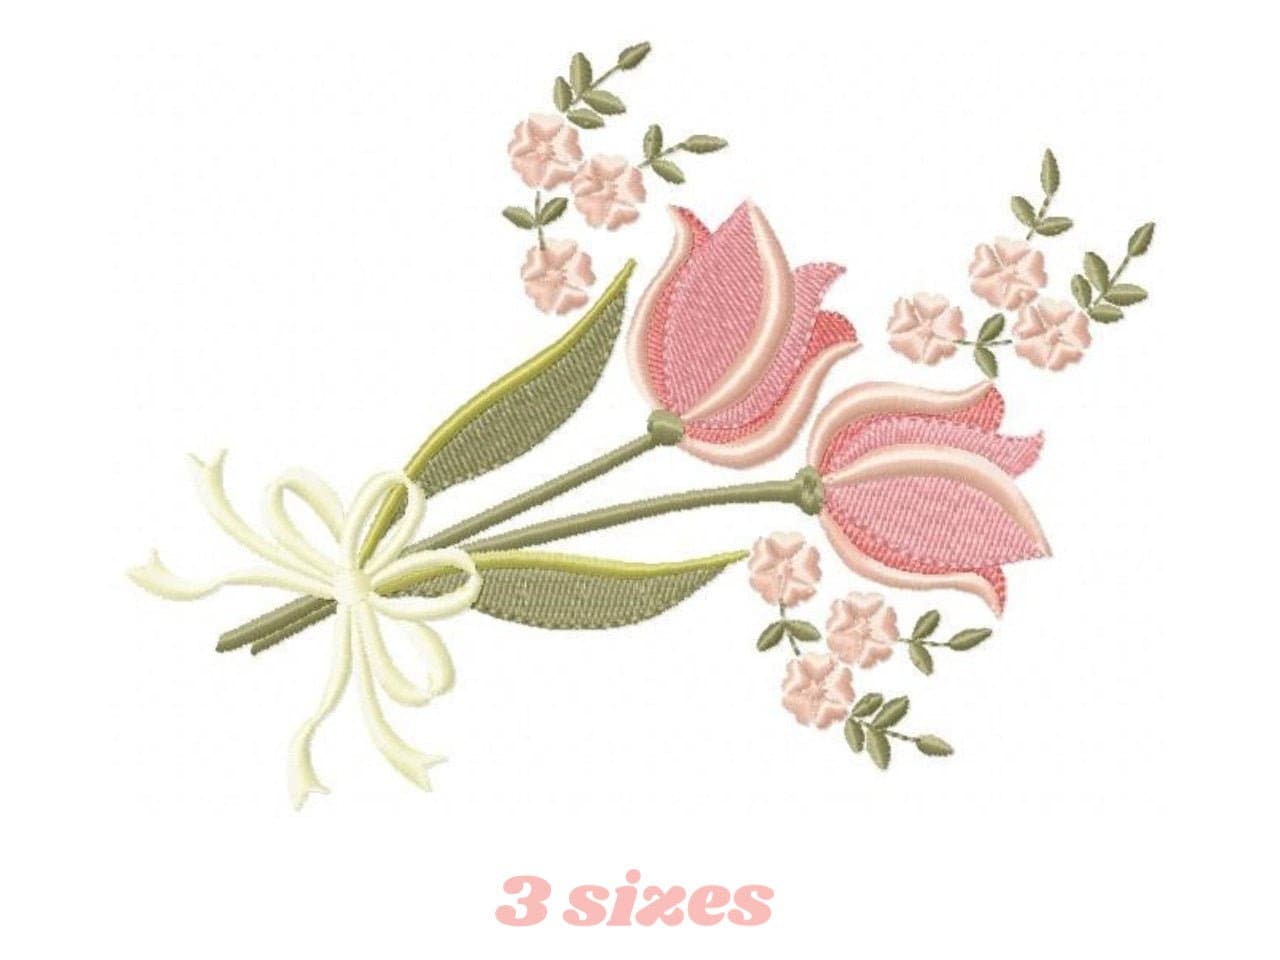 flower themed stencils for etching on glass (mixed) tulip daffodil rose  daisy craft hobby present